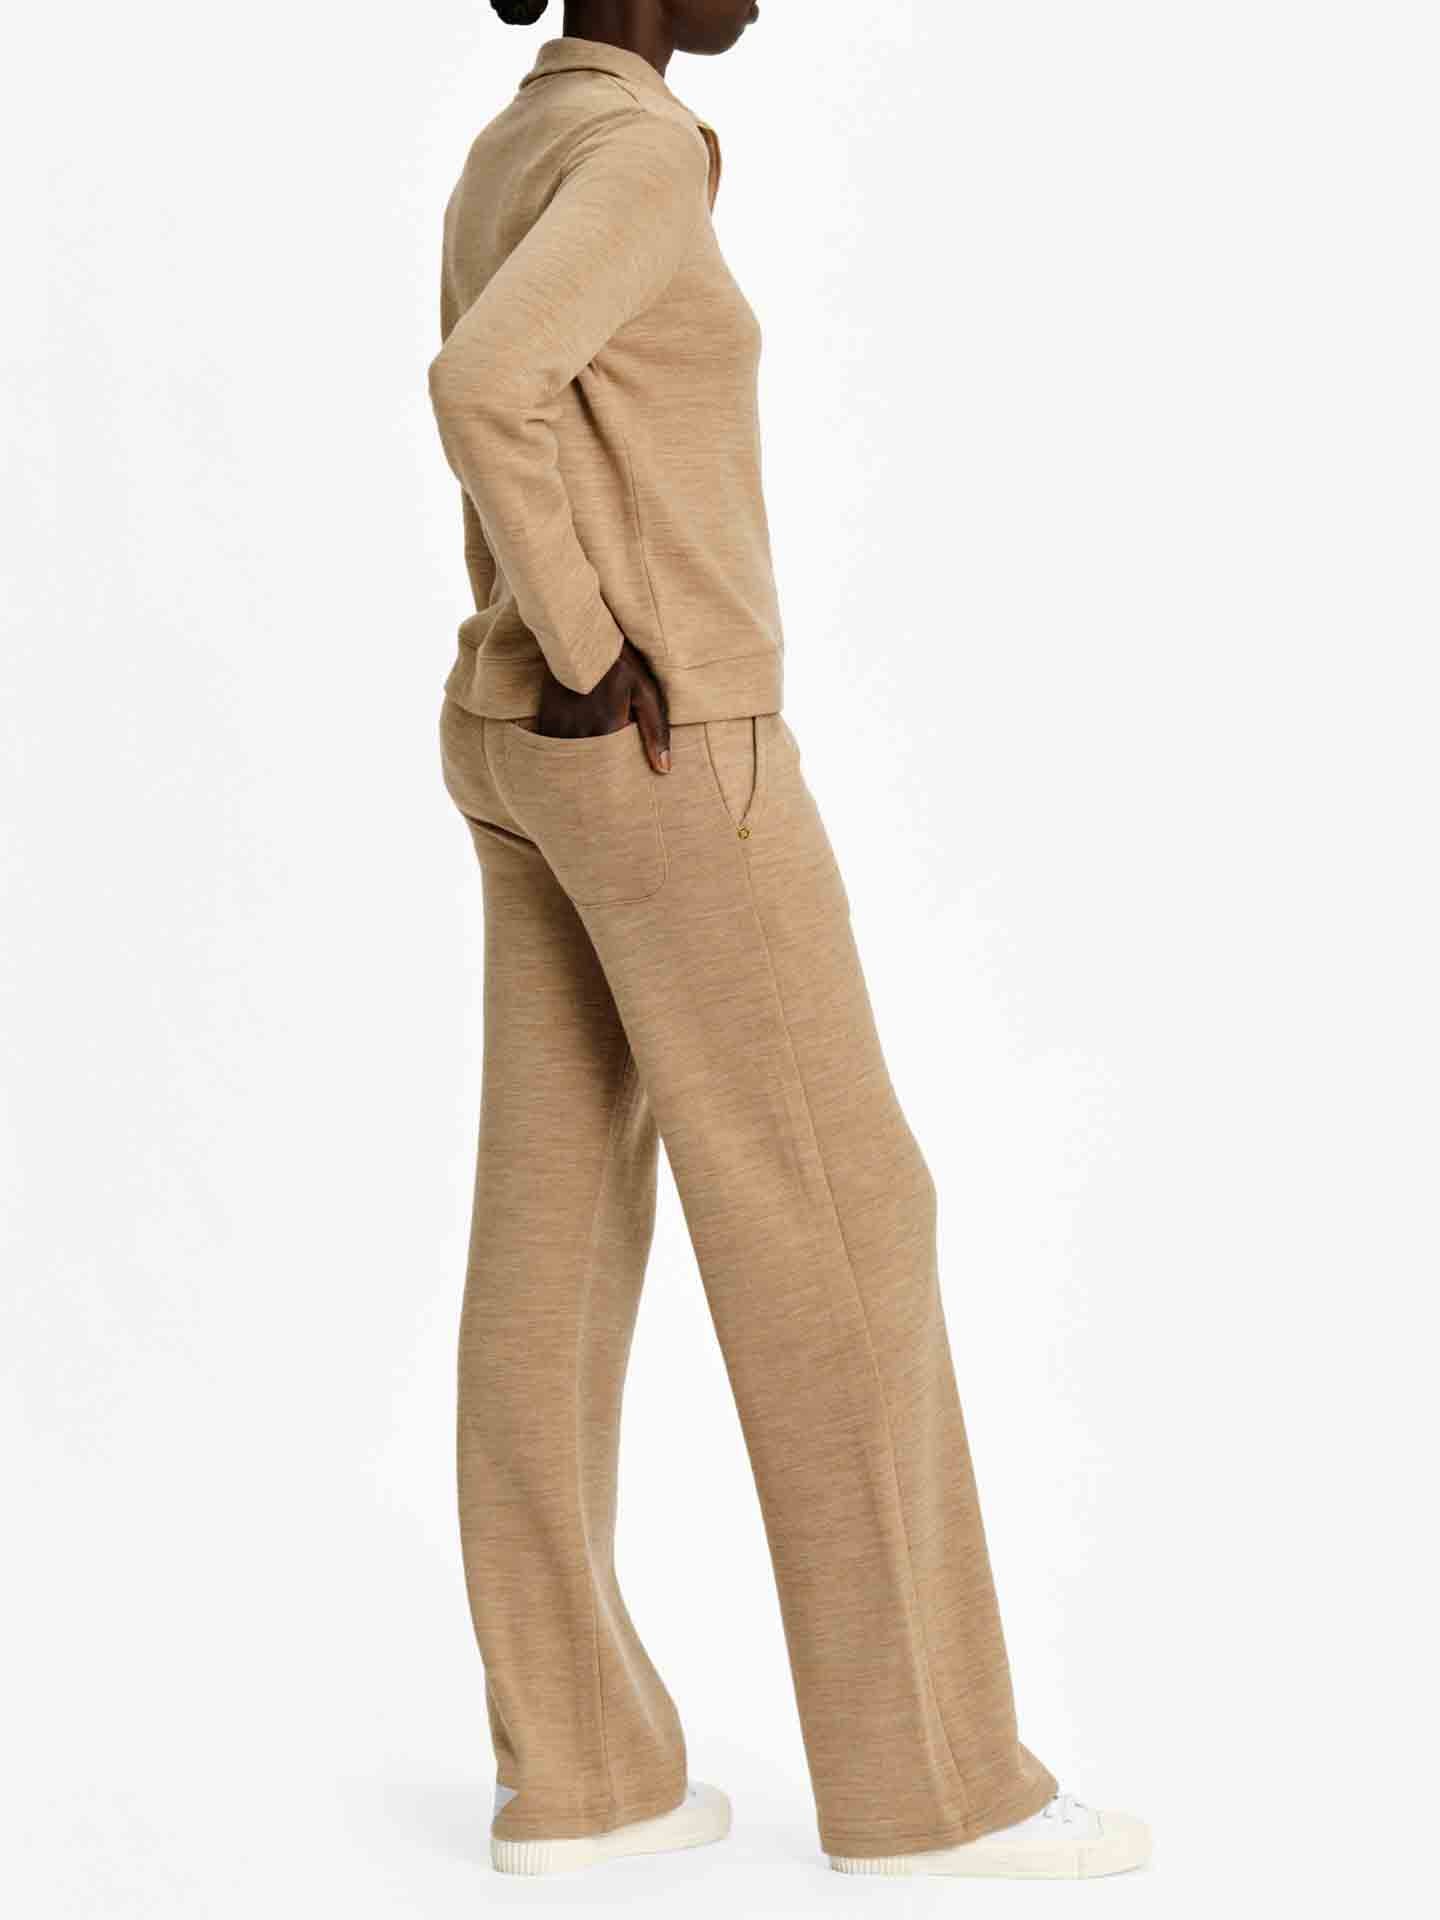 Find Out Where To Get The Pants | Elegant pants outfit, Trousers women  outfit, Clothes